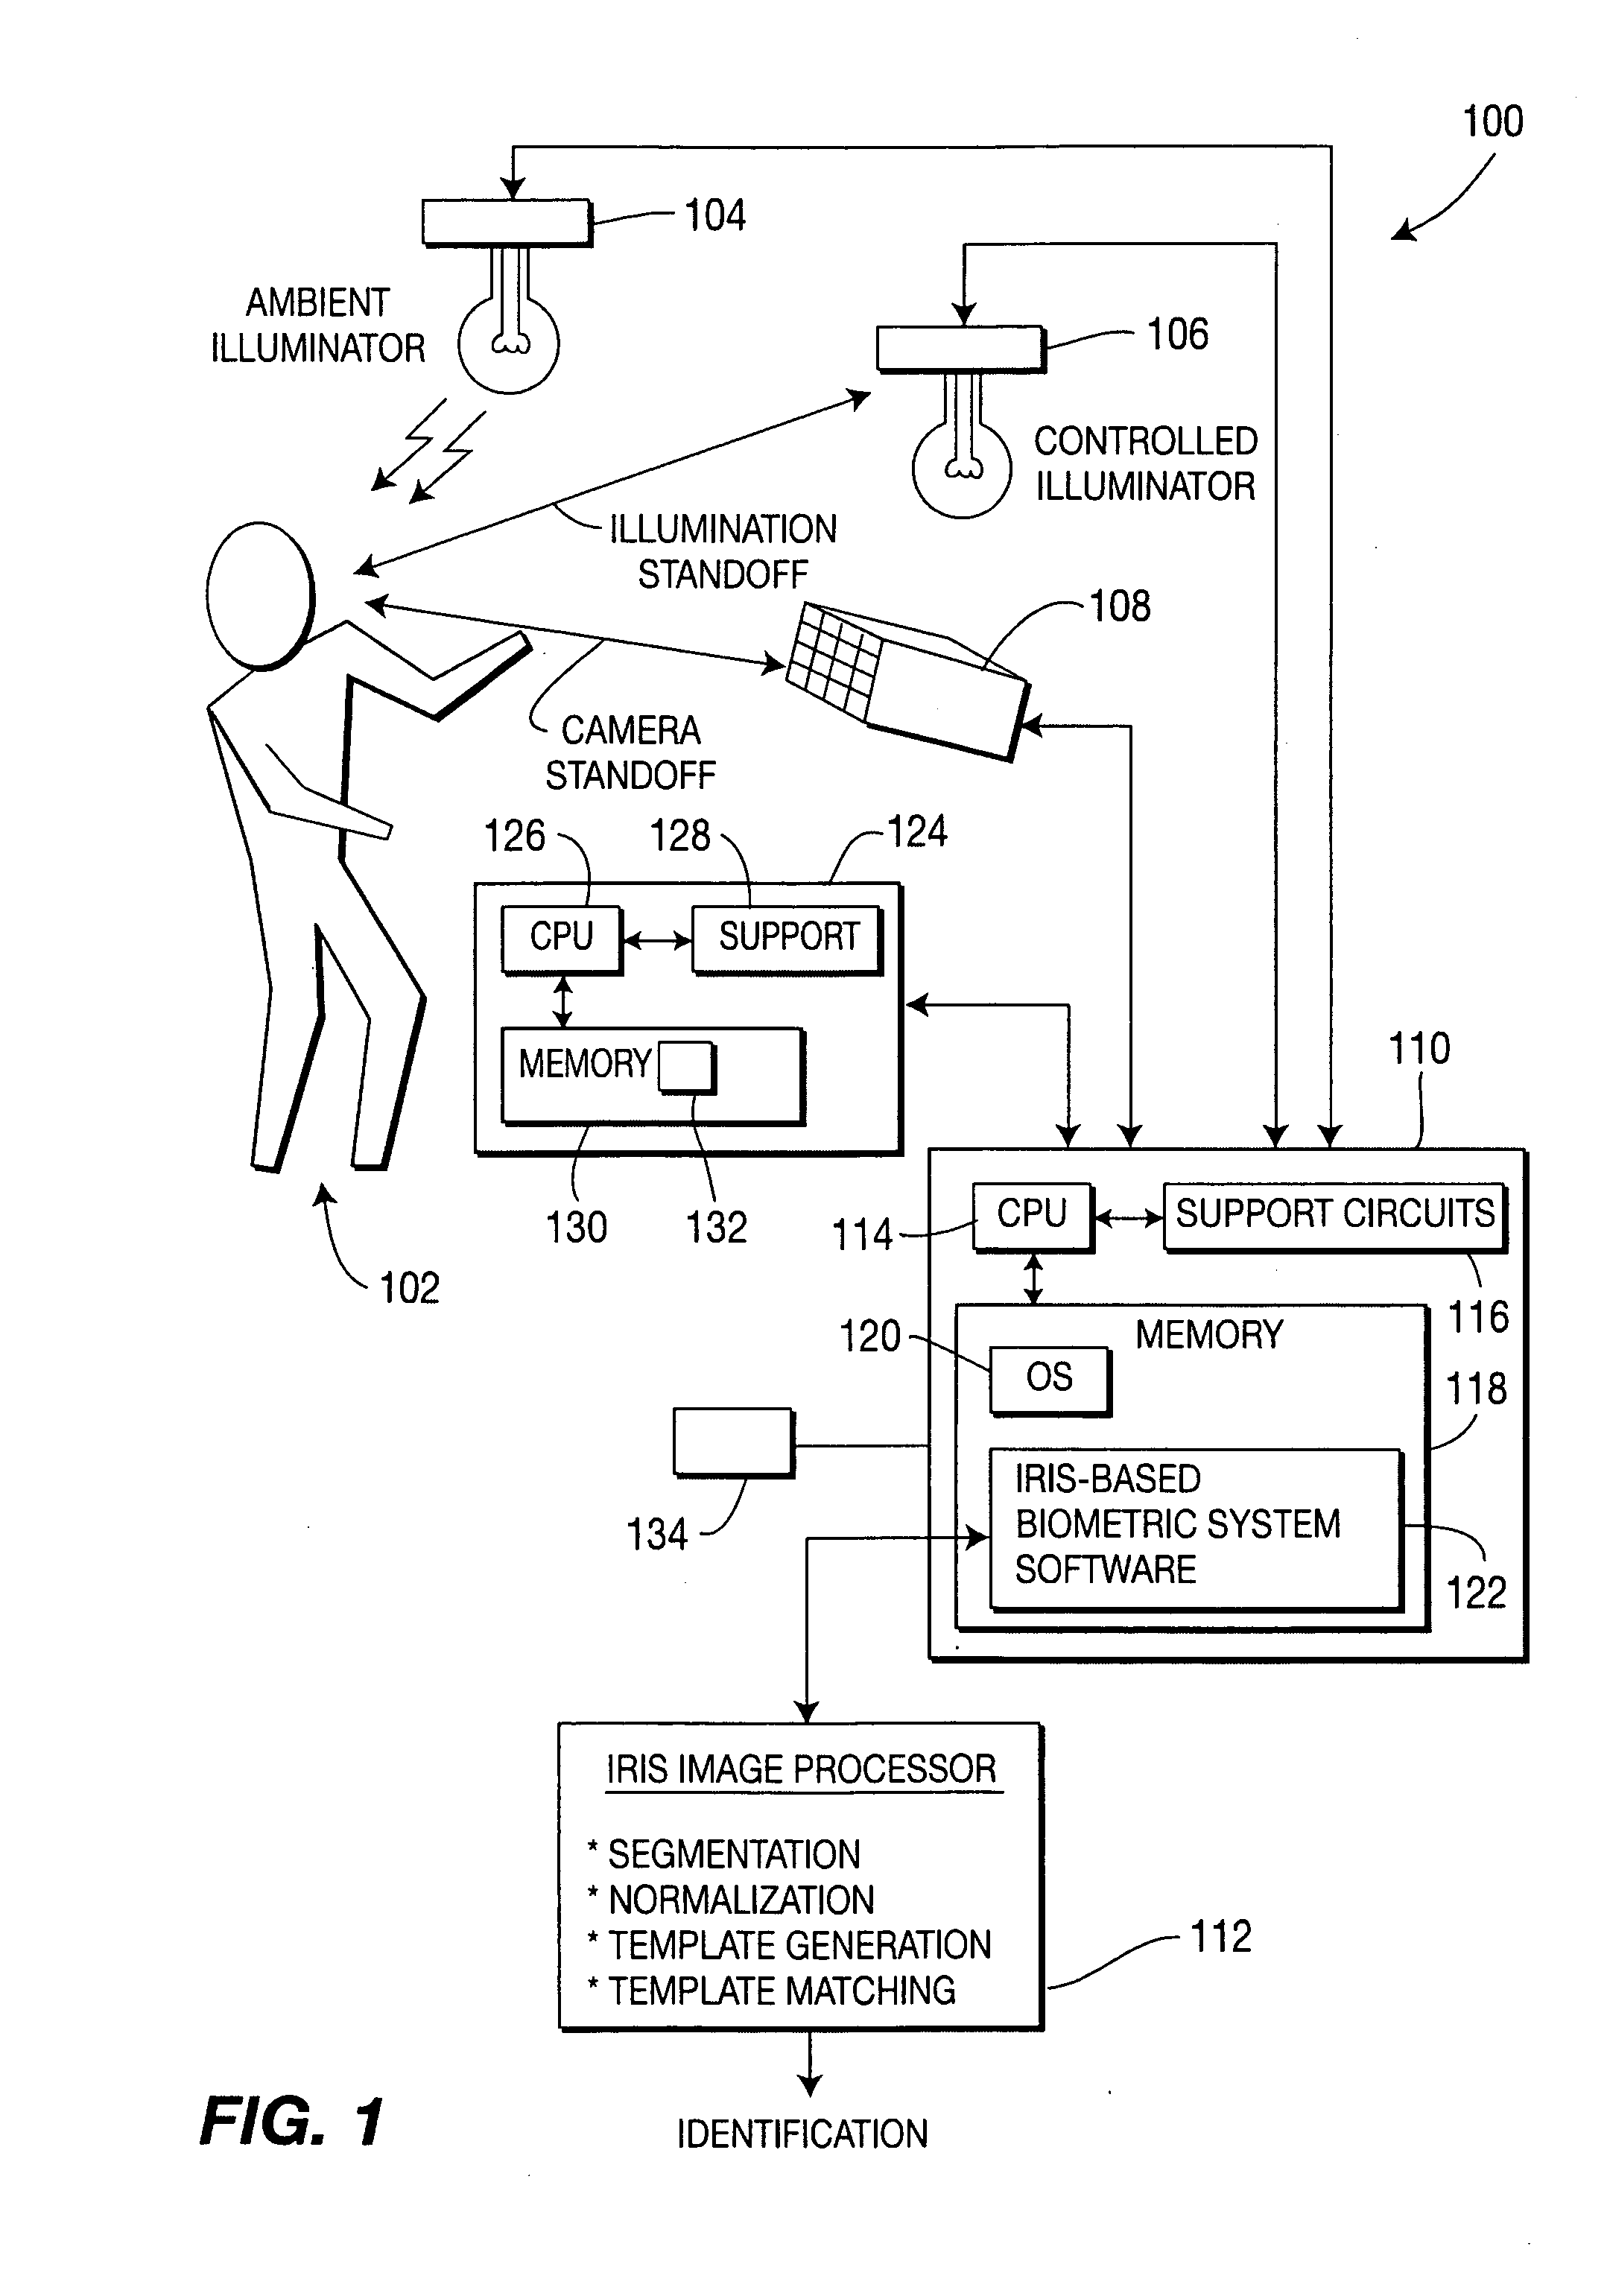 Method and apparatus for obtaining iris biometric information from a moving subject